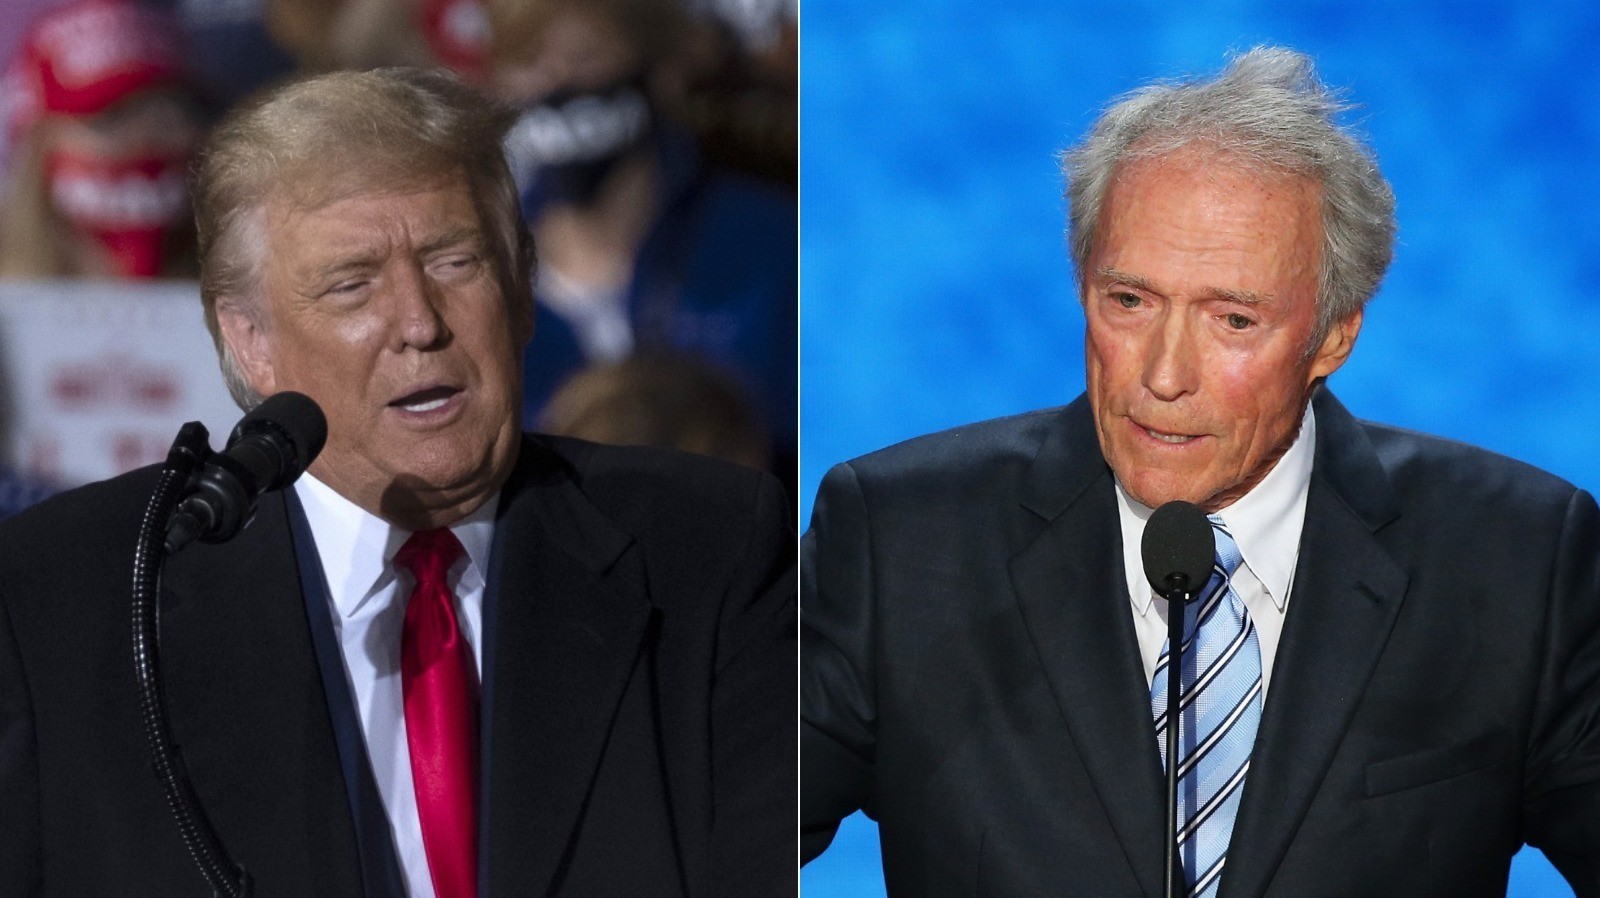 Clint Eastwood And Donald Trump's